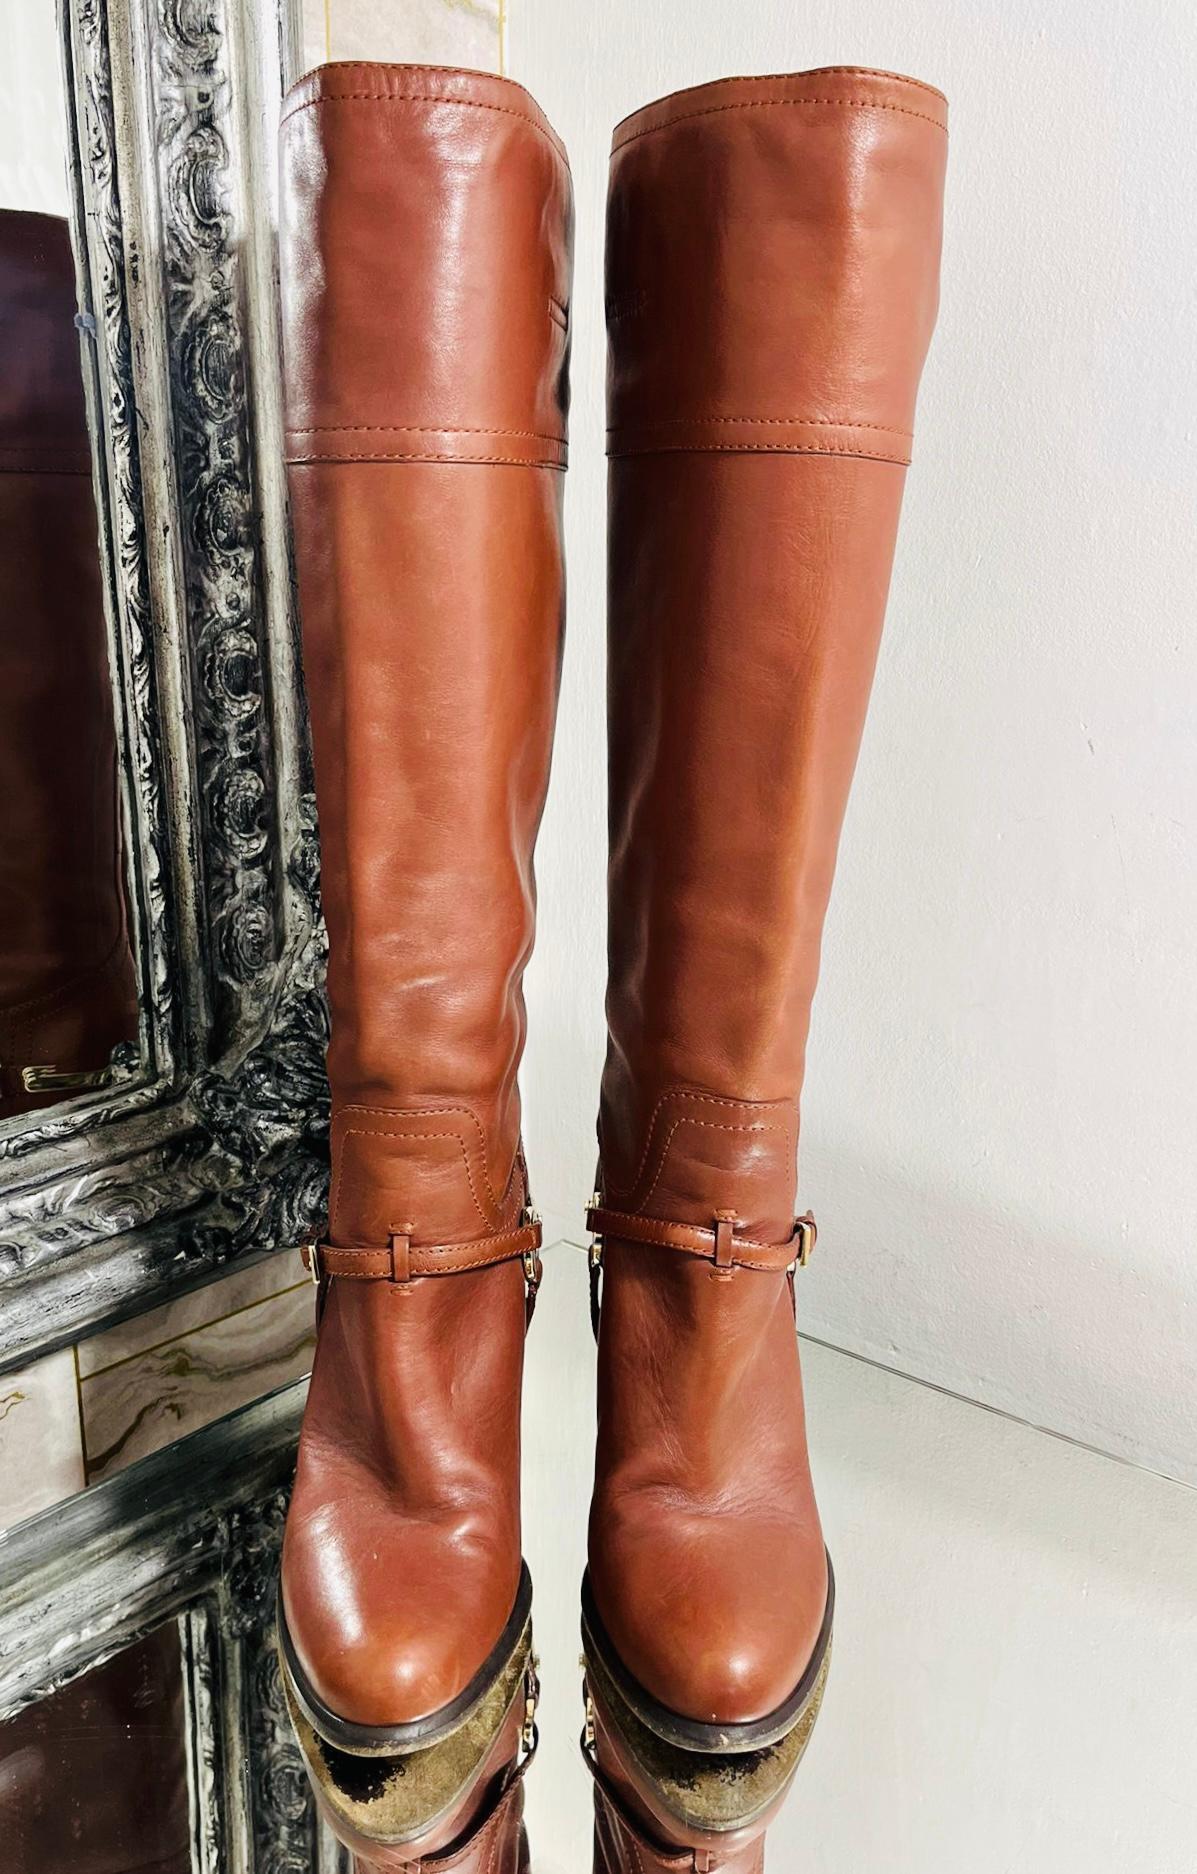 Christian Dior Logo Leather Knee Boots

Brown high boots designed with leather strap buckle detailing to the side.

Detailed with gold ring and stirrup to the heel embellished with 'CD' logo engravement.

Featuring high, block heel and pull-on